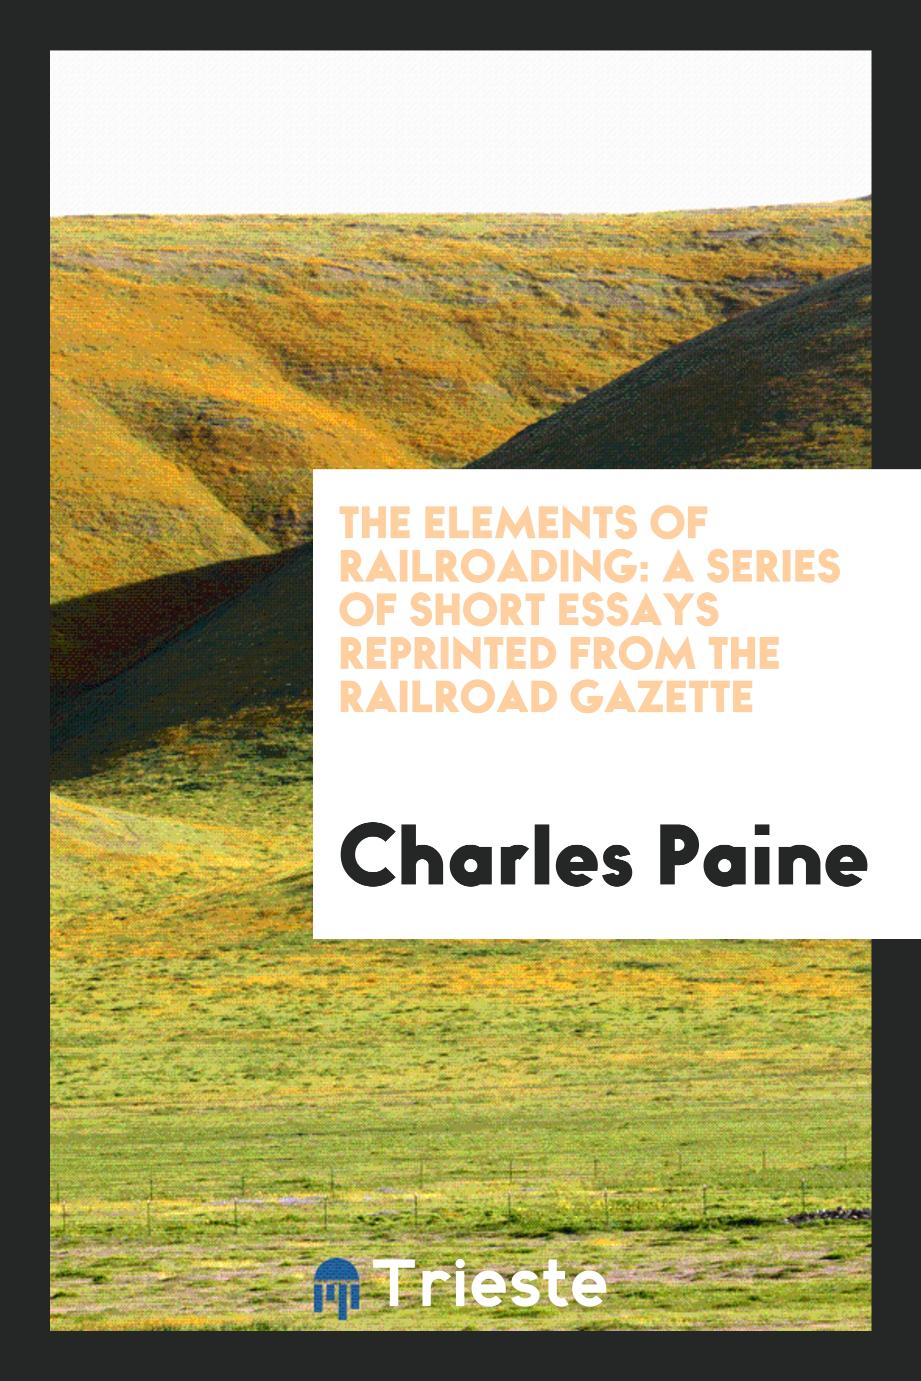 Charles Paine - The Elements of Railroading: A Series of Short Essays Reprinted from the Railroad Gazette